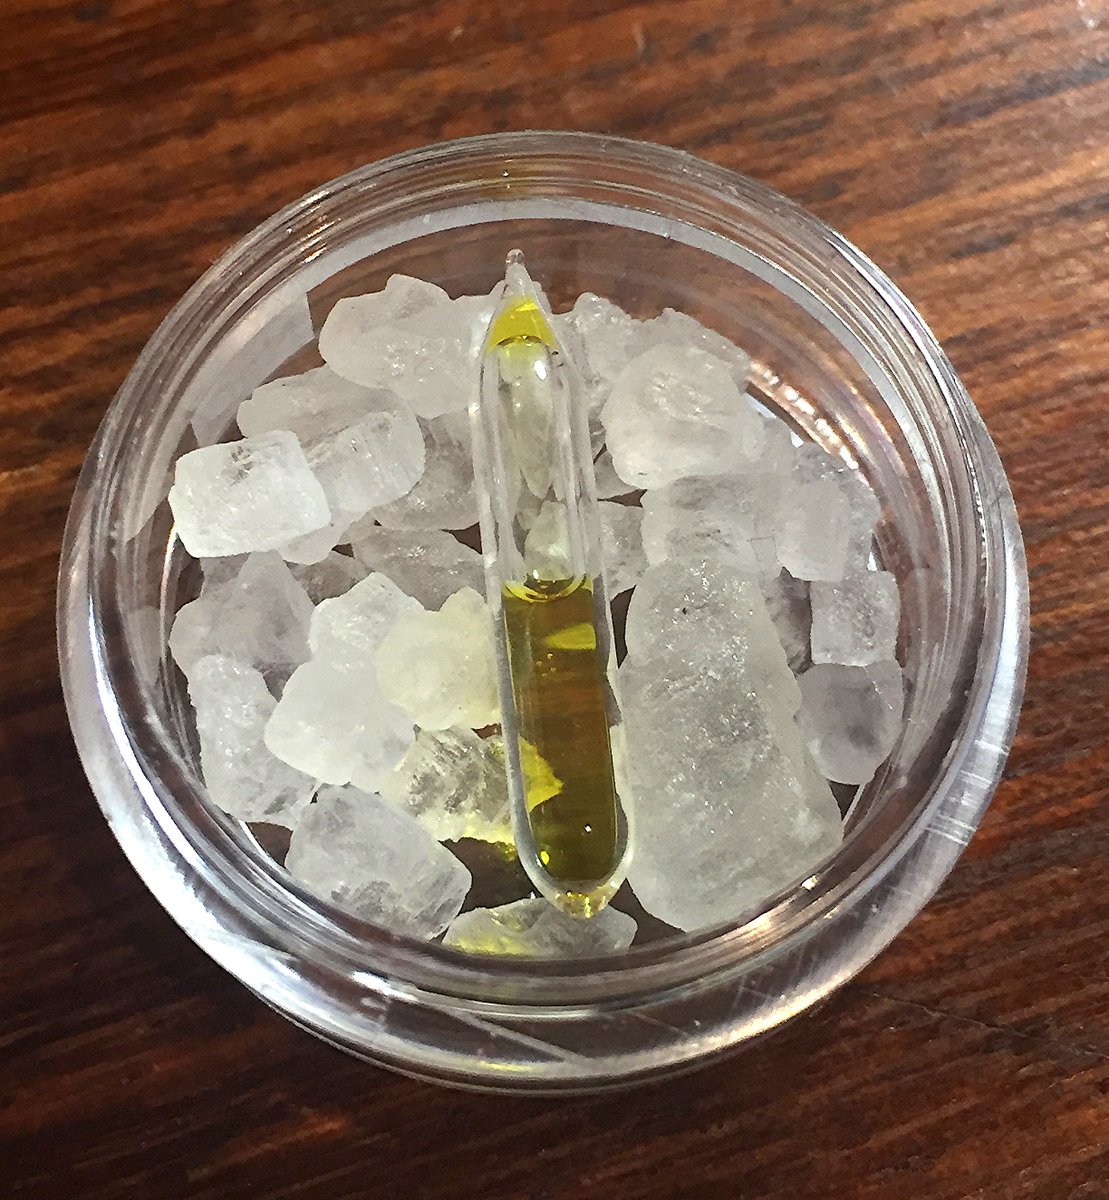 Chlorine  #elementphotos. Chlorine becomes a yellow liquid under high pressure; here a high-pressure ampoule lies on a bed of rocksalt (NaCl).